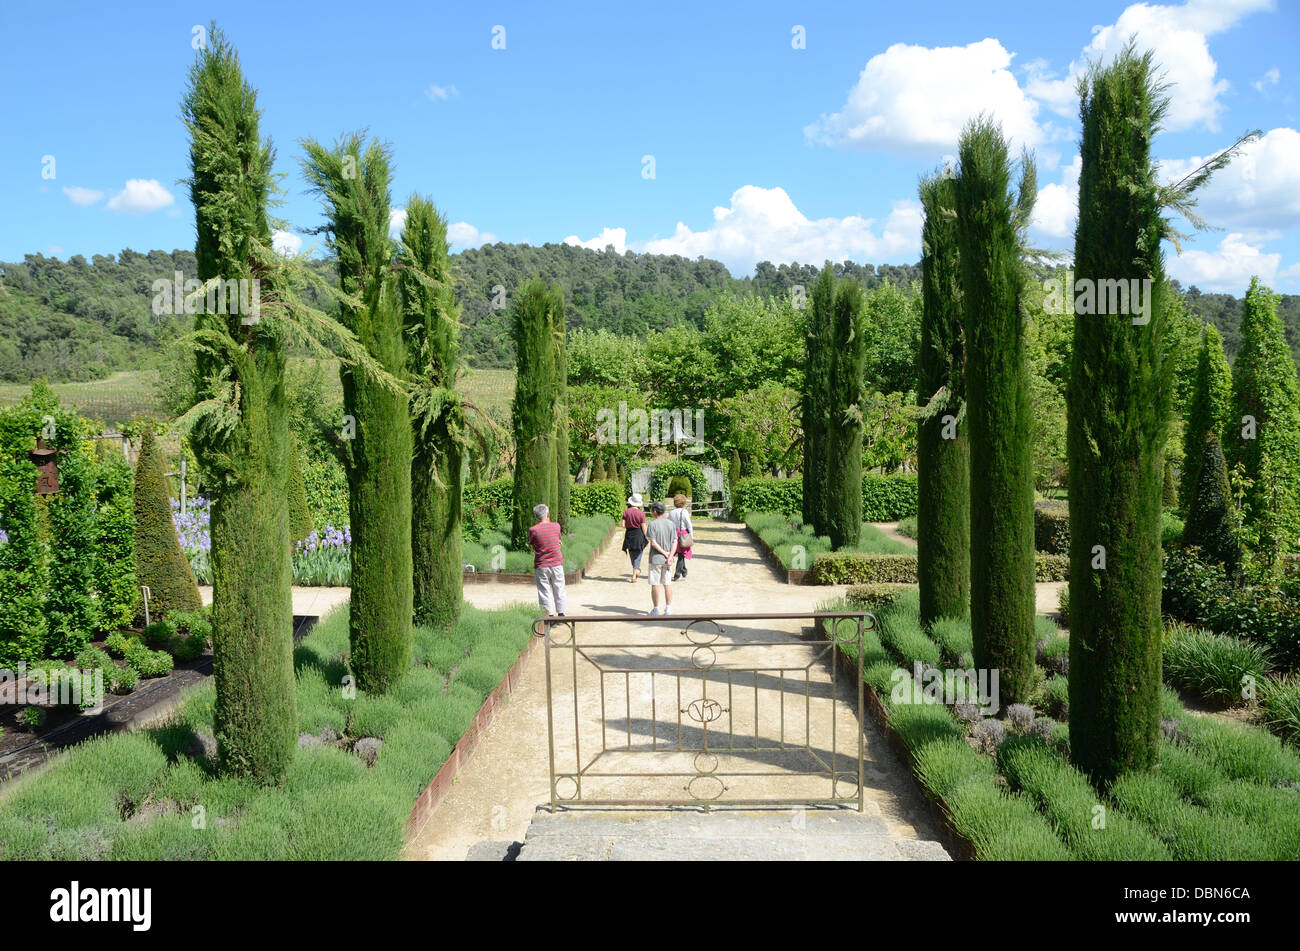 Lines, Rows or Avenue of Cypress Trees & Visitors or Tourists in Garden at Château Val Joannis Pertuis Luberon Provence France Stock Photo